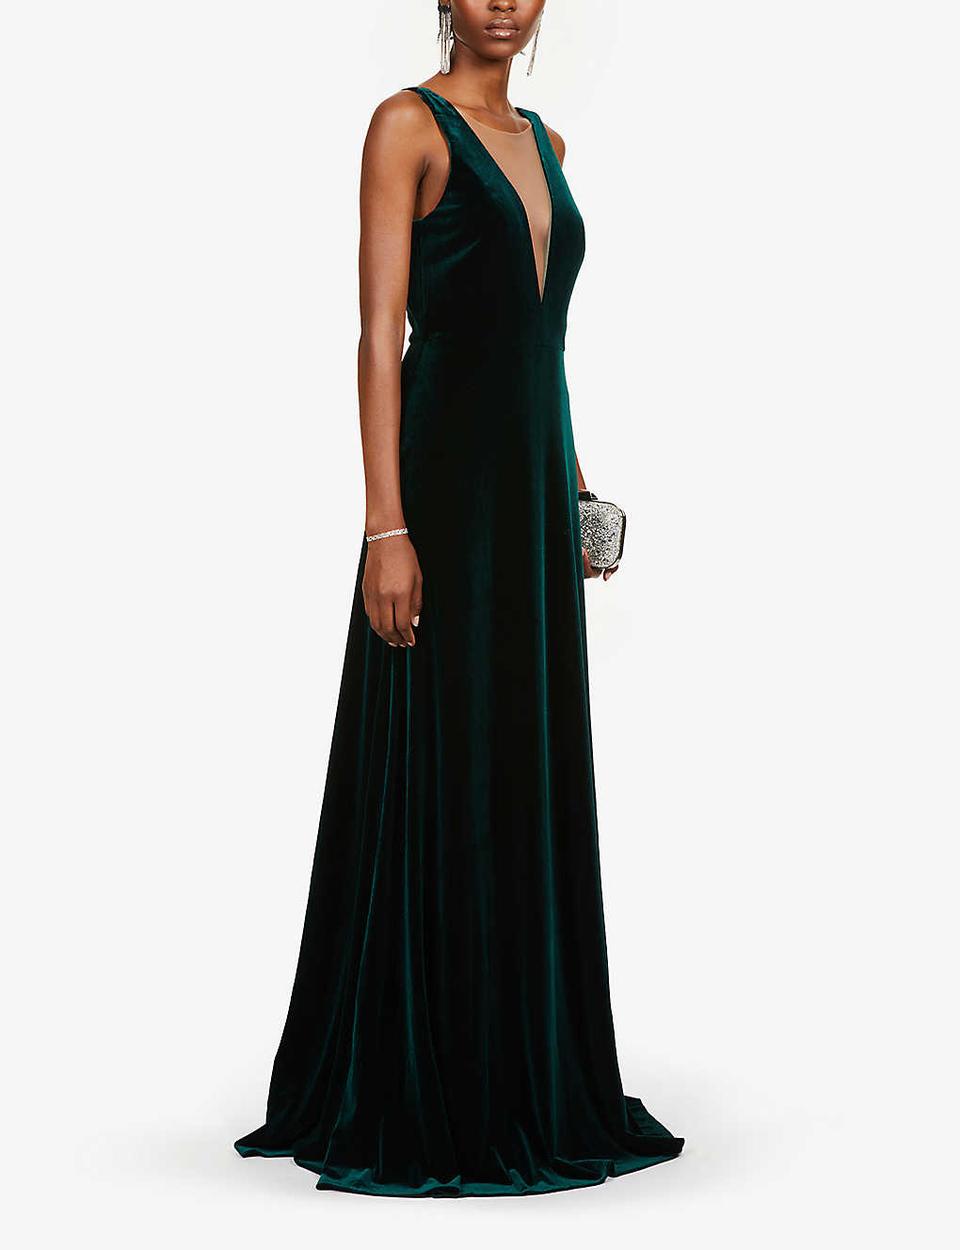 Velvet Bridesmaid Dresses: 14 Chic Styles - hitched.co.uk